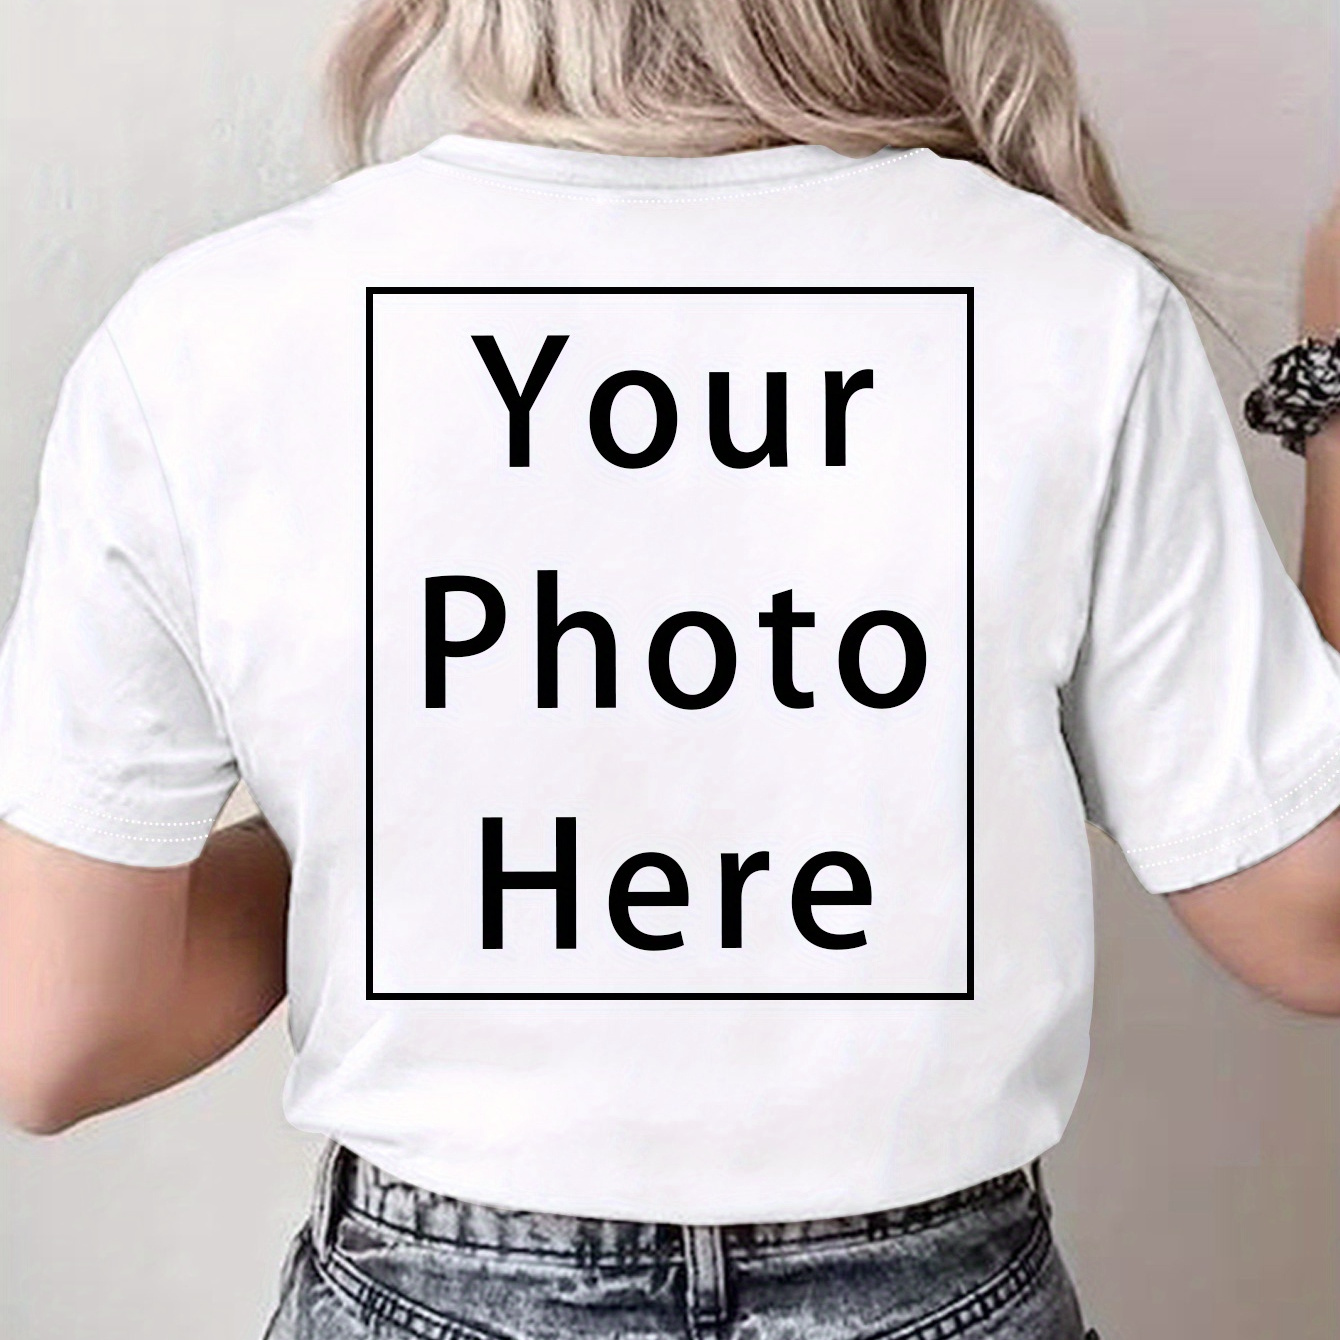 

Customized Graphic Short Sleeve T-shirt, Create T-shirt With Your Individual Design, Women's Clothing